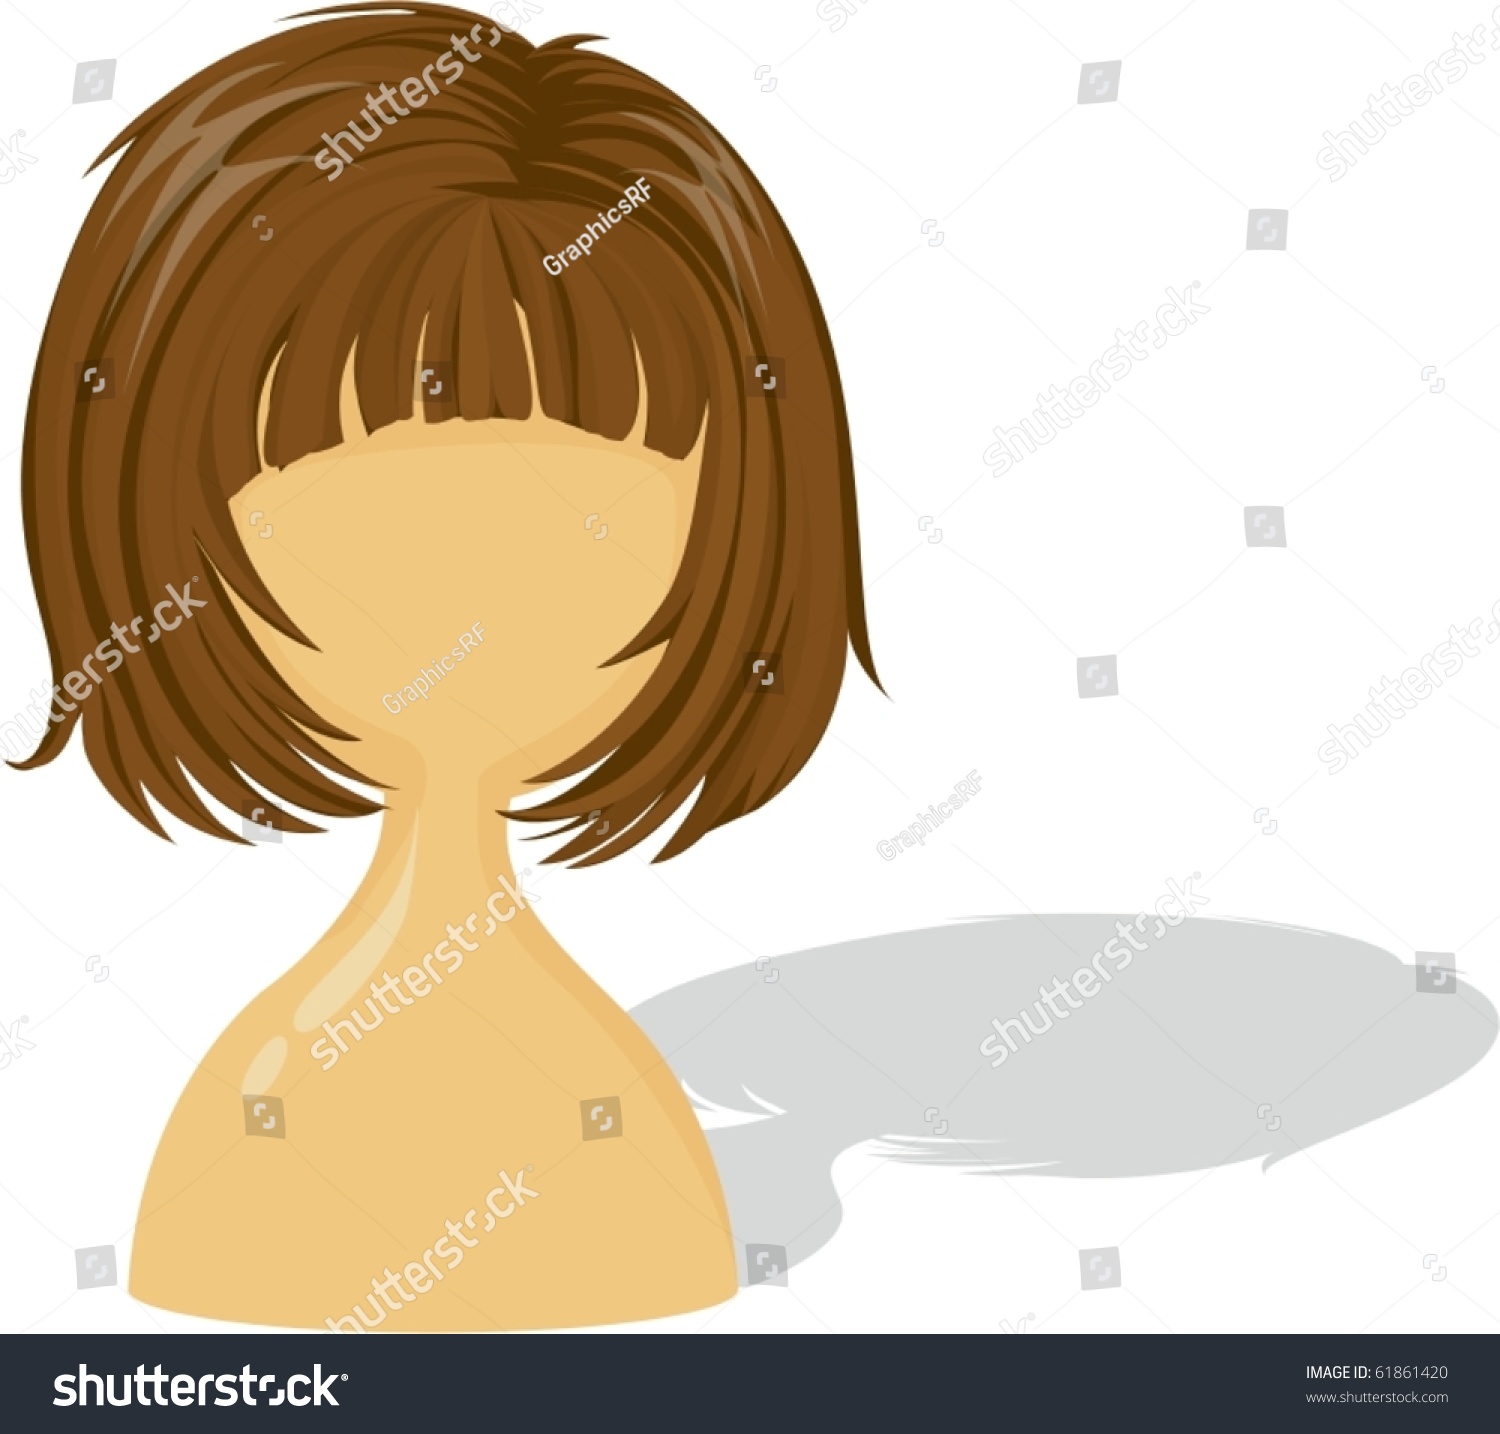 Illustration Of Wig On A White Background - 61861420 : Shutterstock